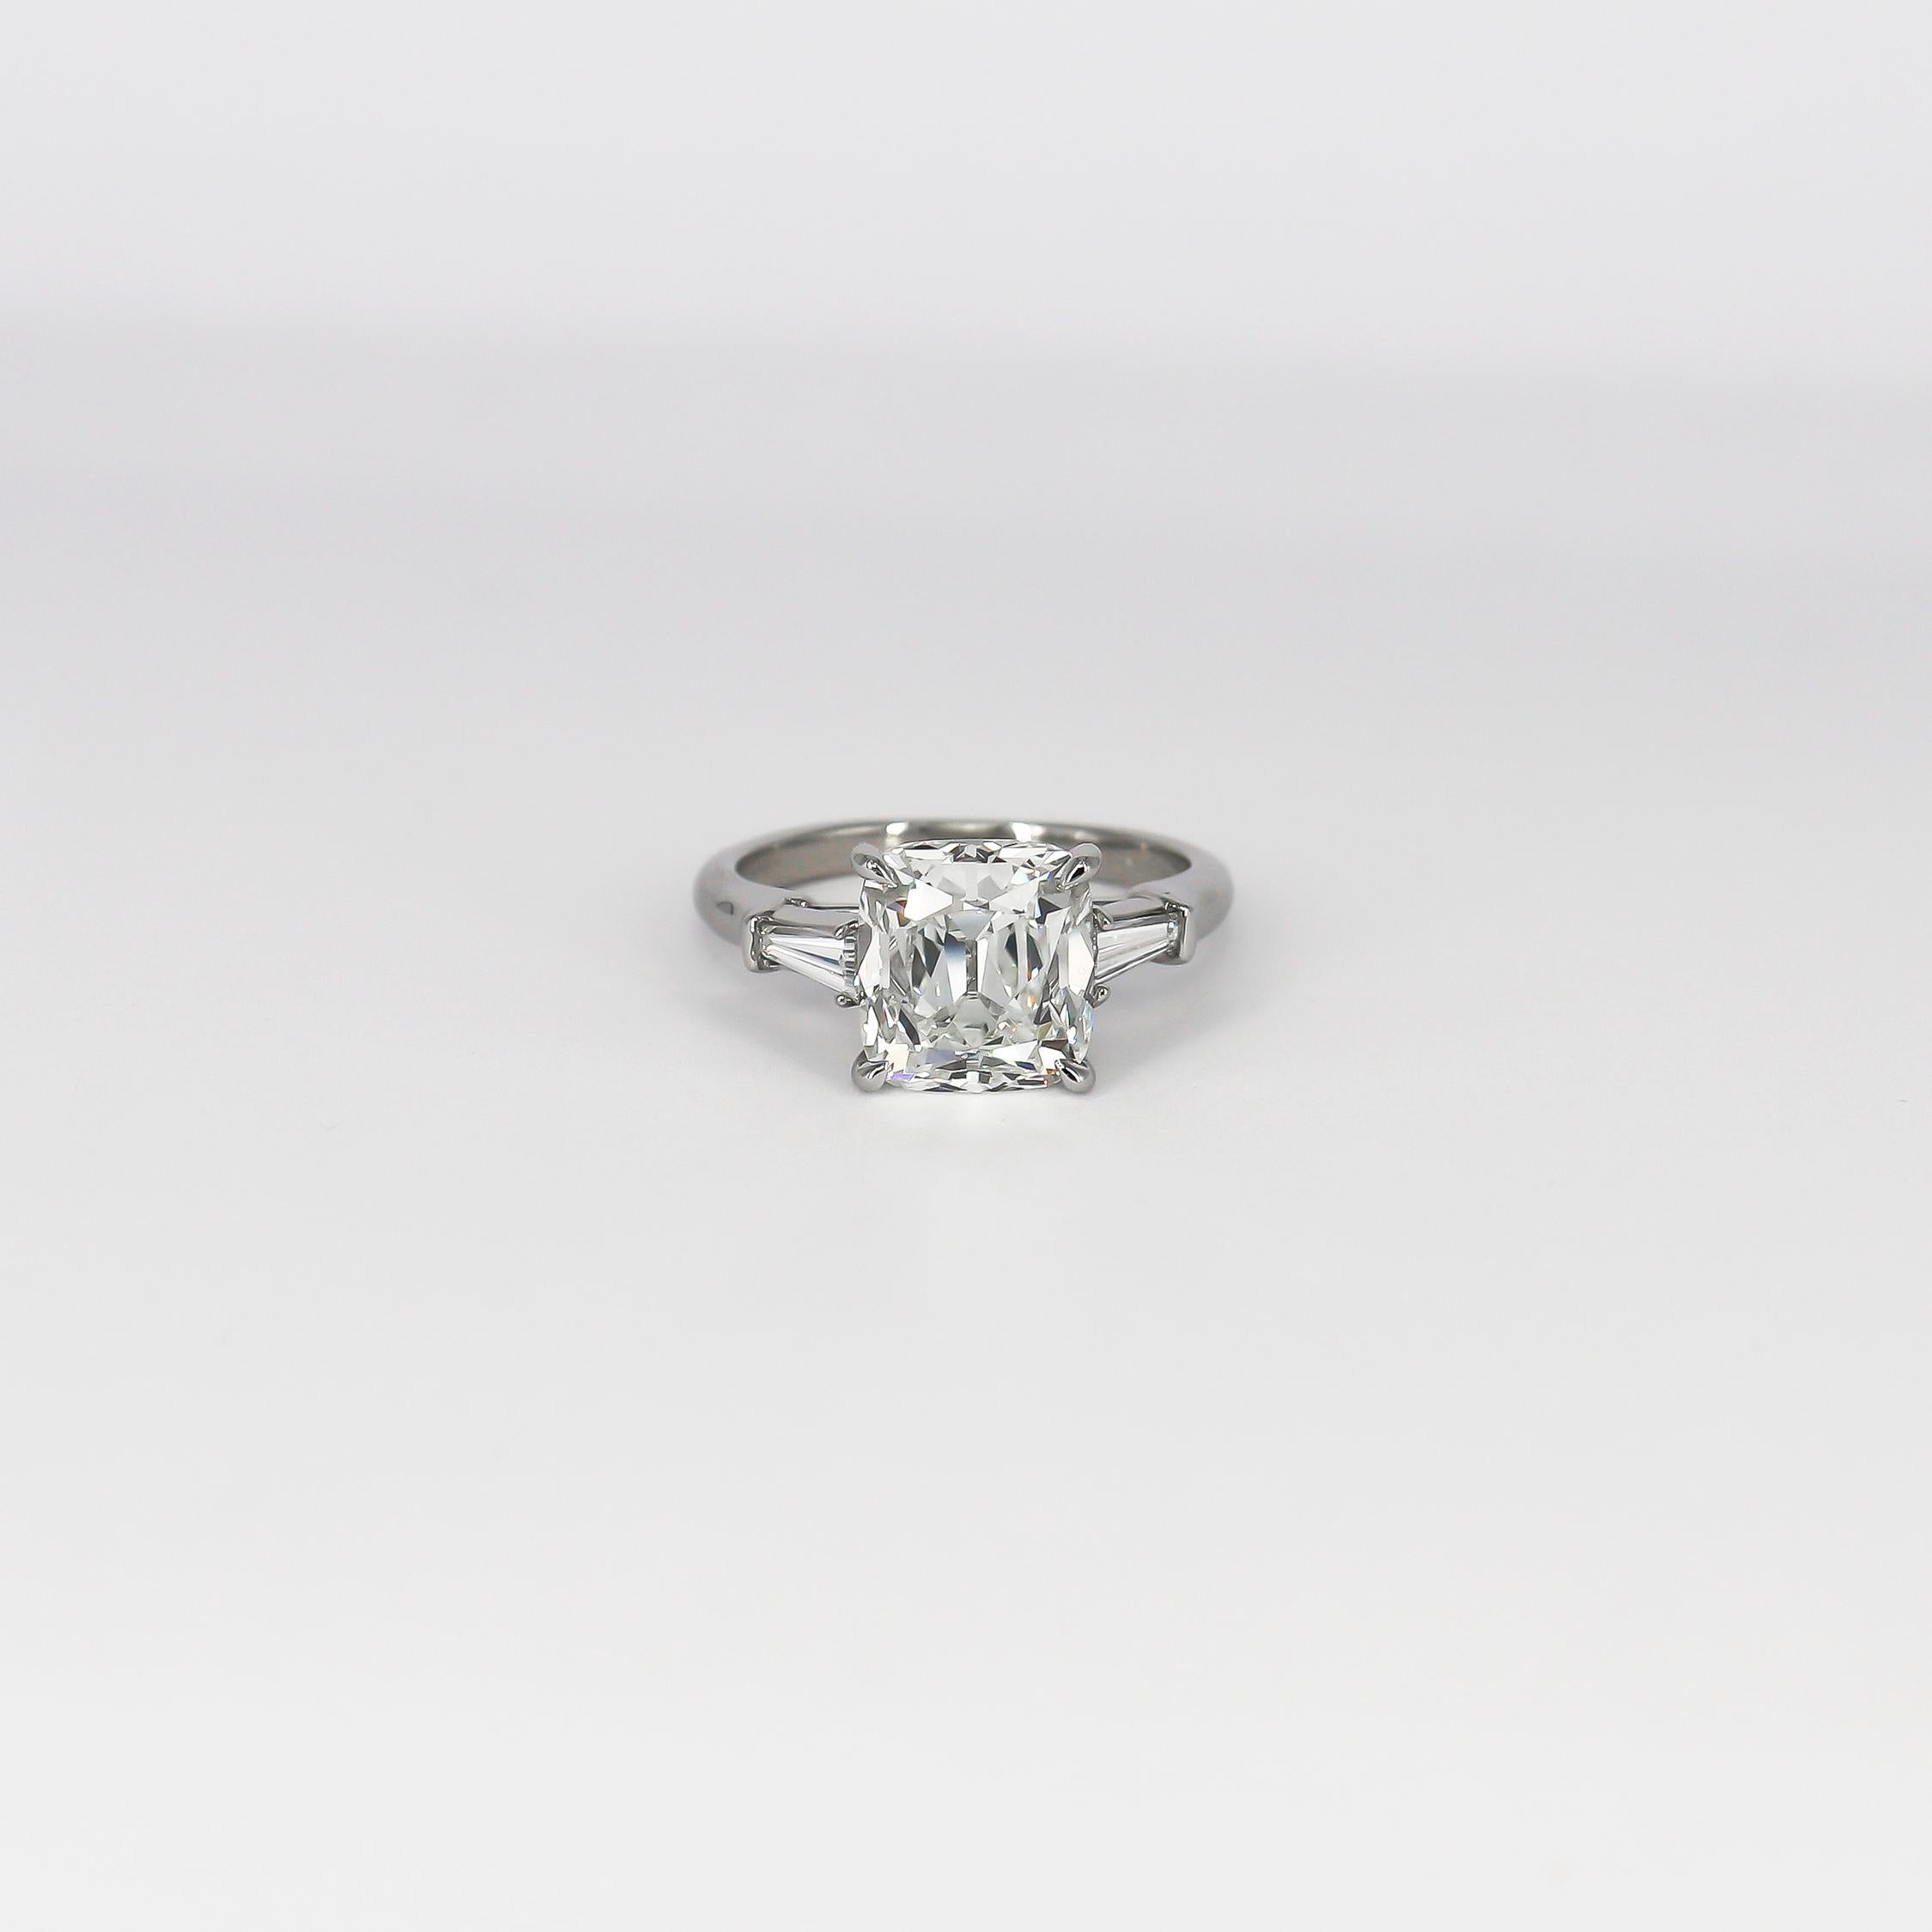 This incredible new piece by the house of J. Birnbach features a GIA certified 4.08 carat old mine cut diamond of J color and VS1 clarity as described by GIA grading report #2201799745. Set in an elegant, platinum, three-stone ring with tapered